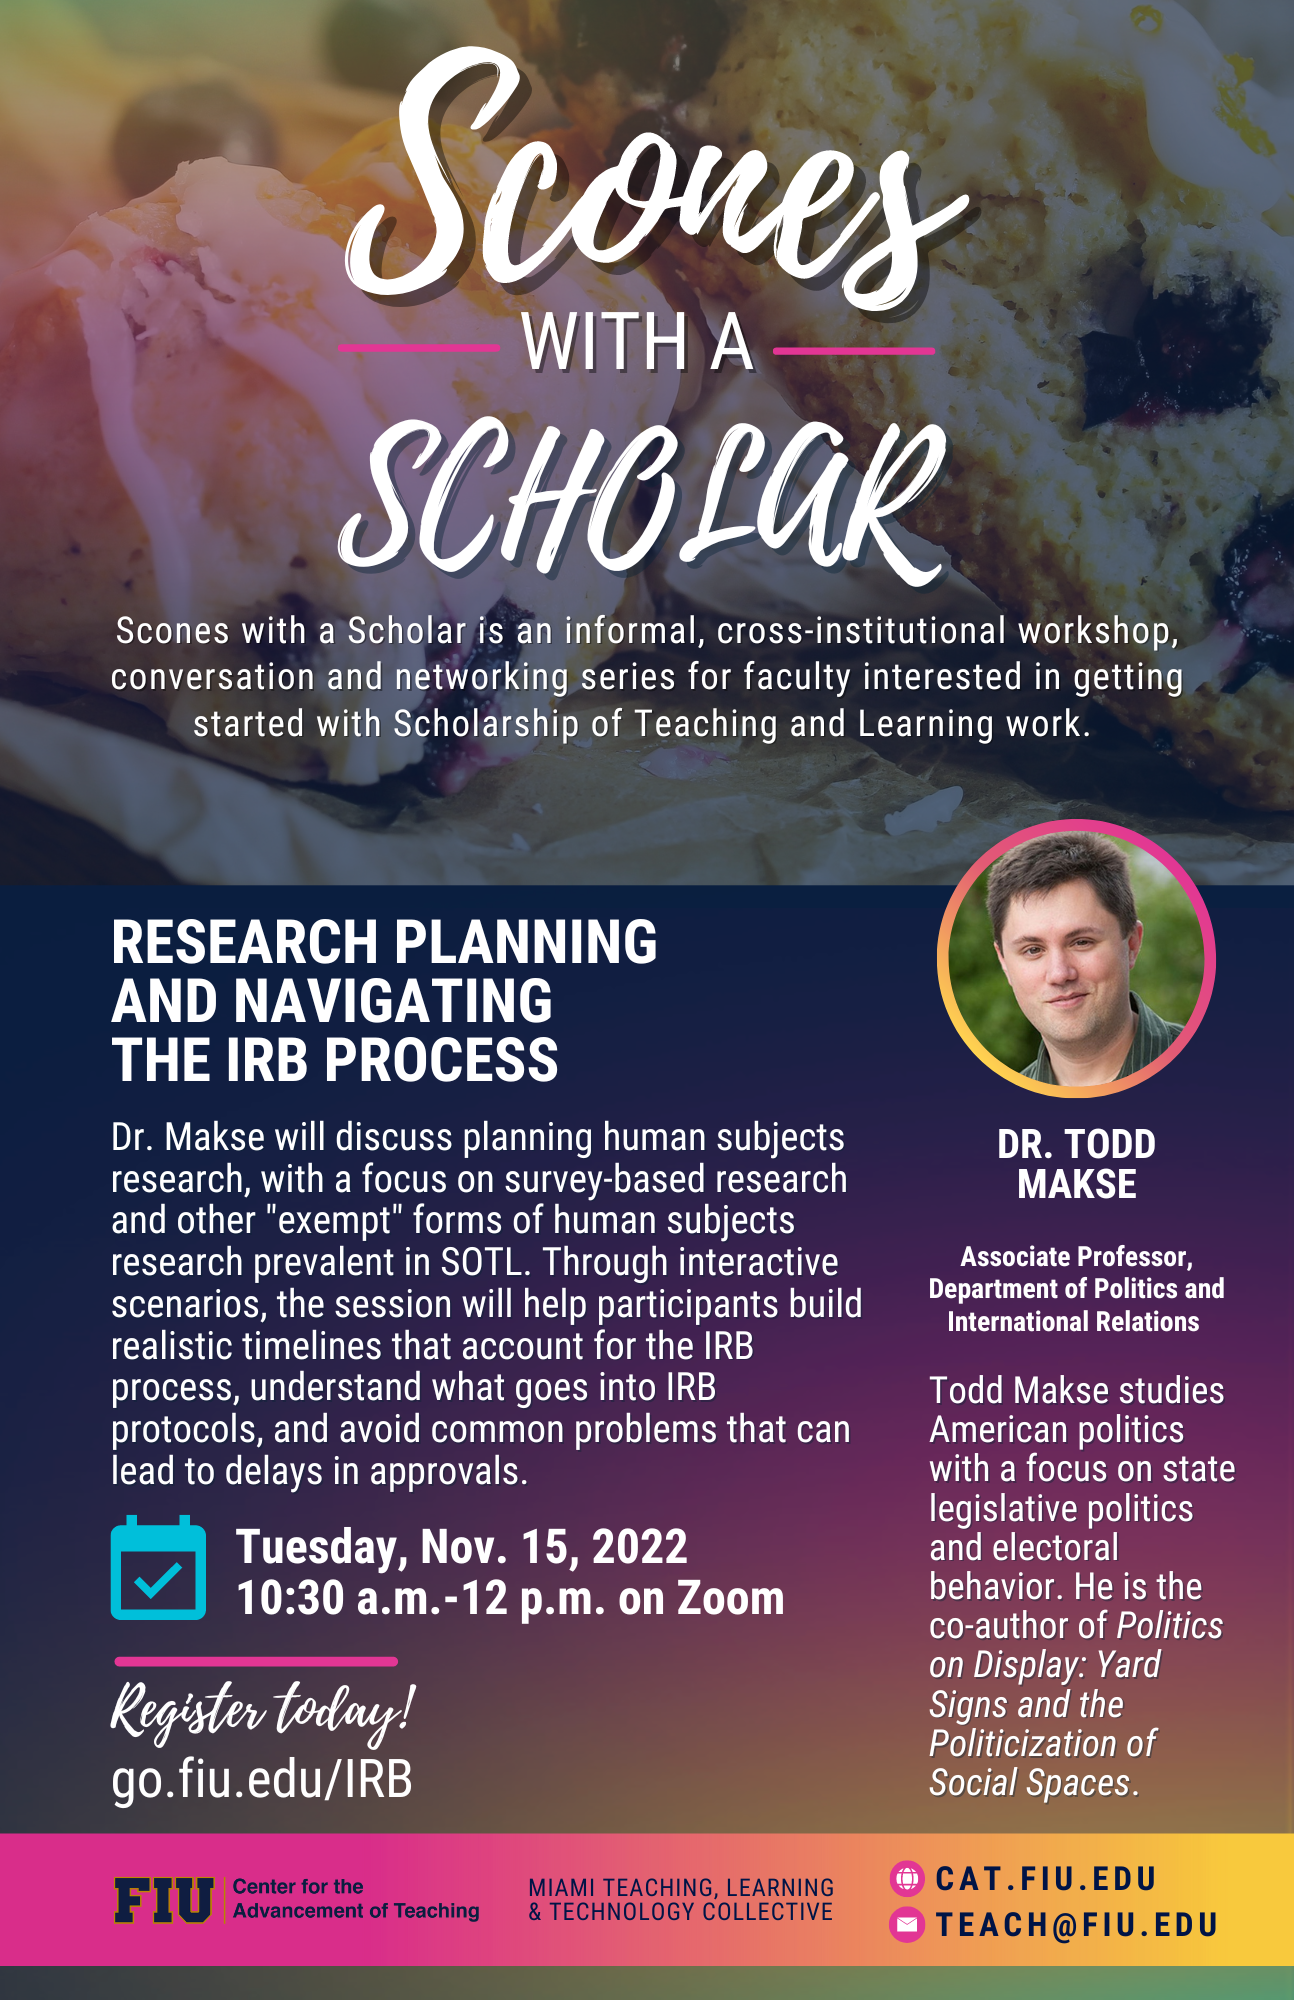 Scones with a Scholar is an informal, cross-institutional virtual workshop, conversation and networking series for faculty interested in getting started with Scholarship of Teaching and Learning work. Dr. Todd Makse will present Research Planning and Navigating the IRB Process on Thursday, November 15th from 10:30 AM to 12:00 PM. Register at go.fiu.edu/irb.